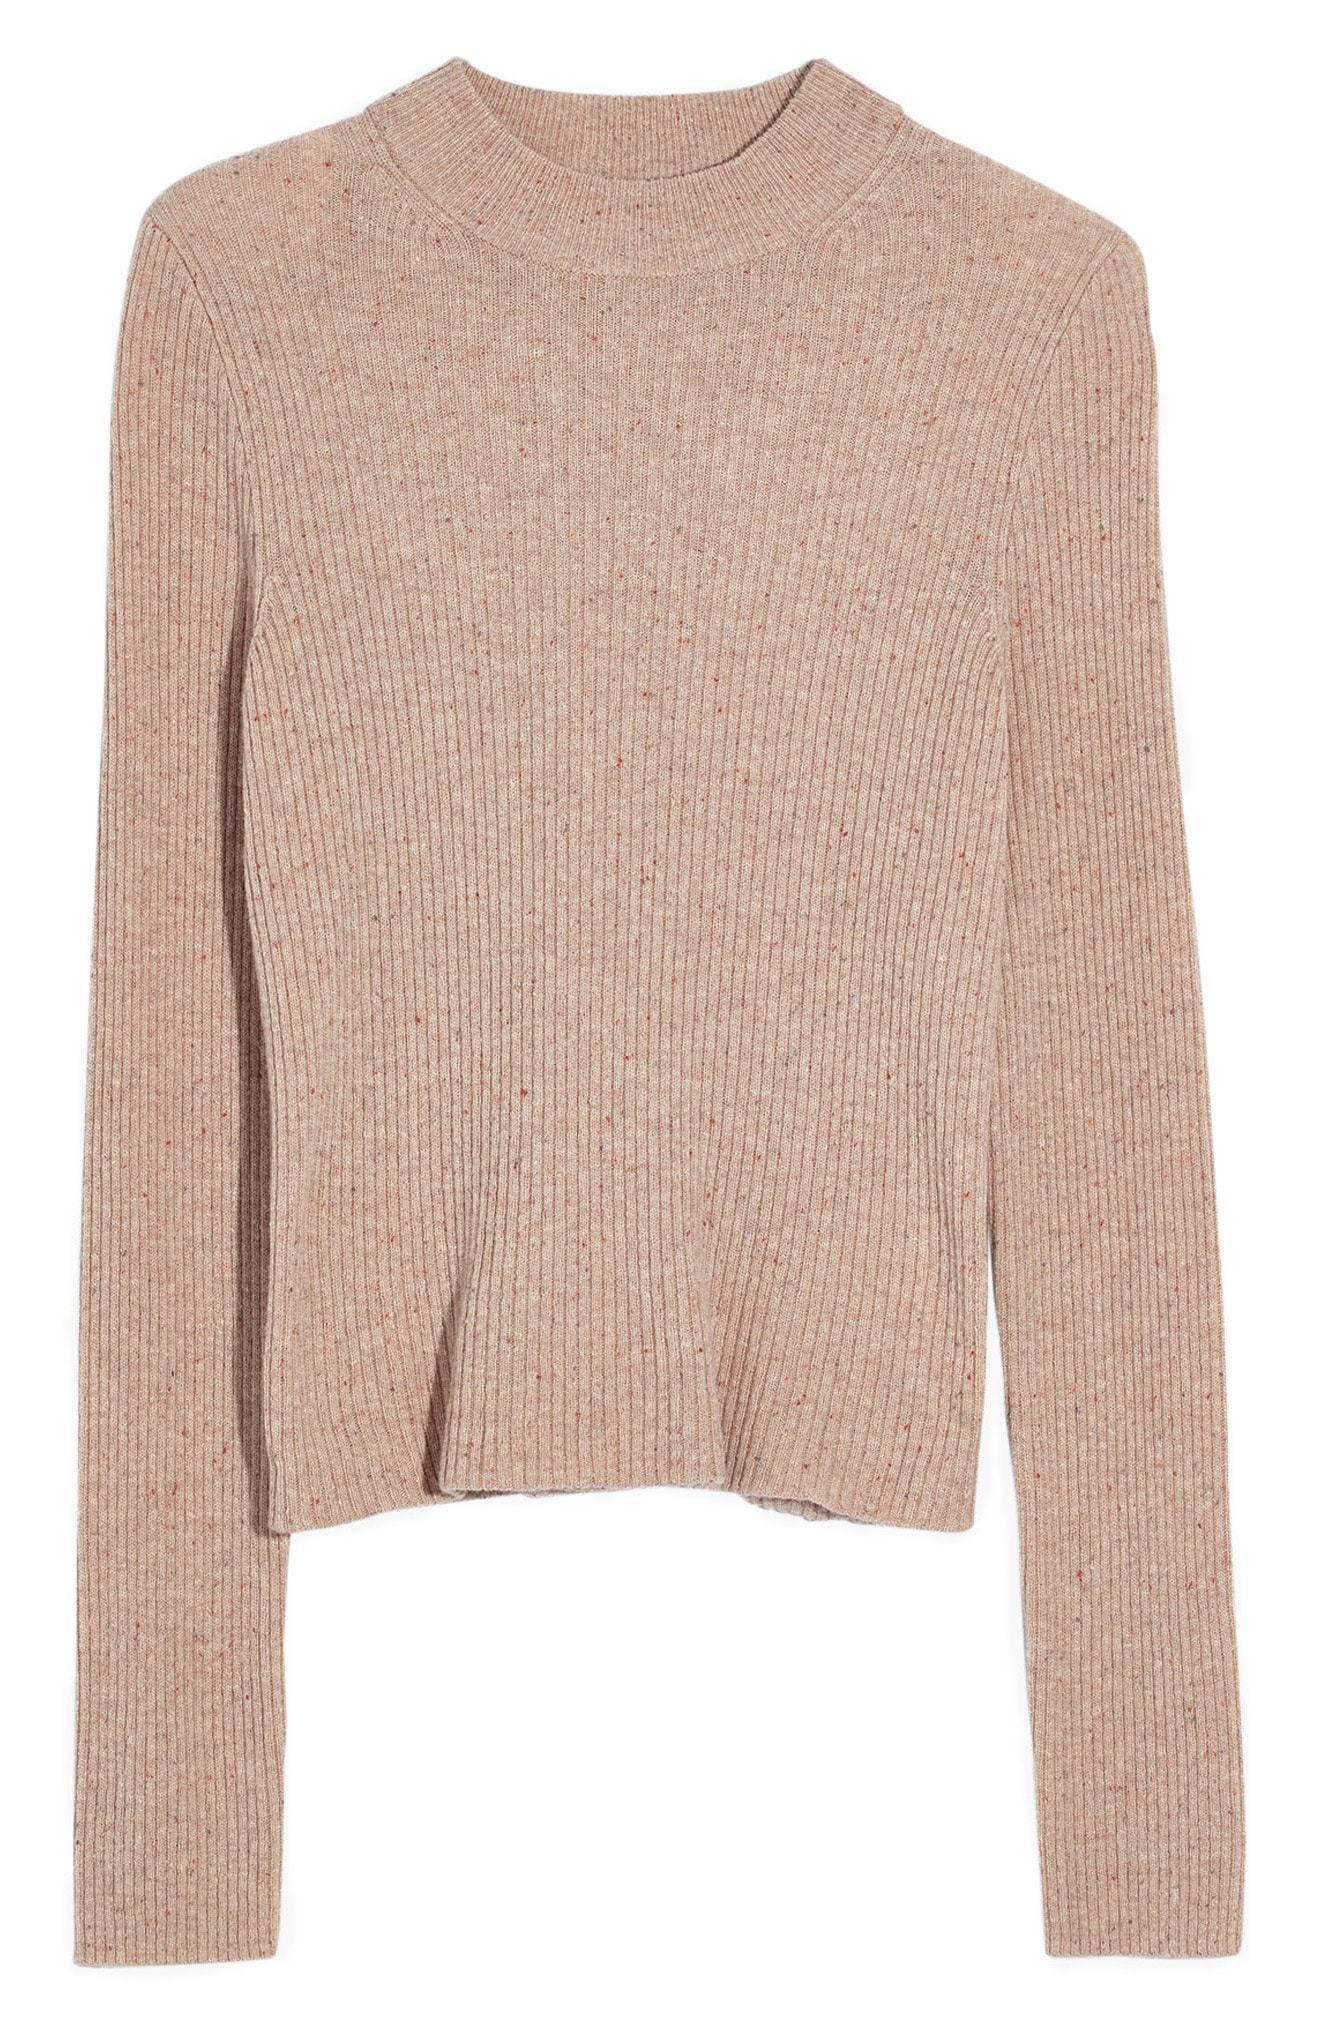 Madewell Mock Neck Pullover Sweater